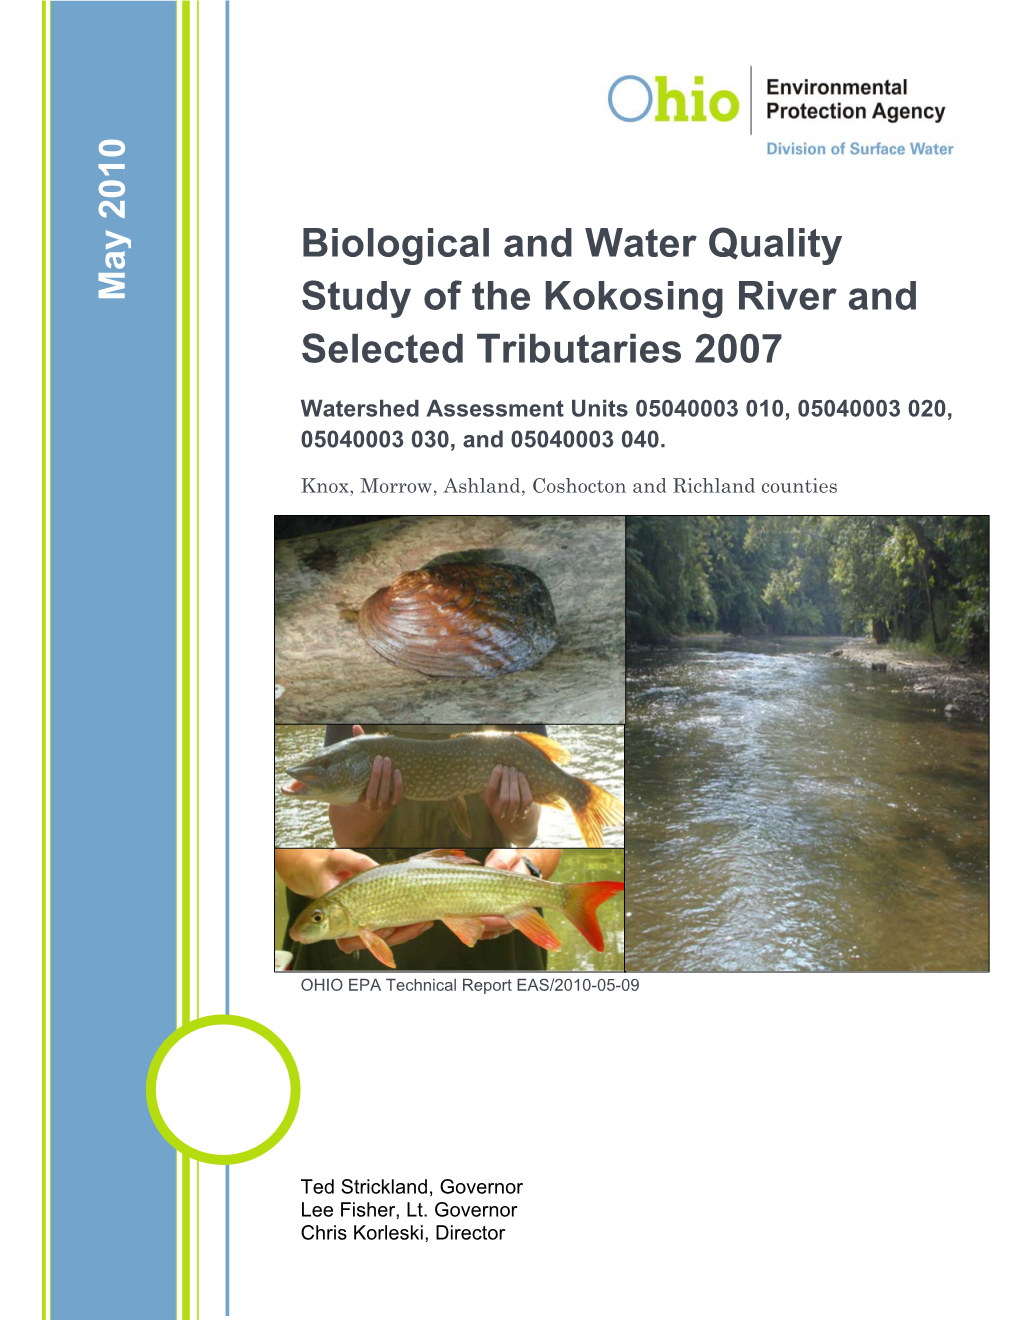 Biological and Water Quality Study of the Kokosing River and Selected